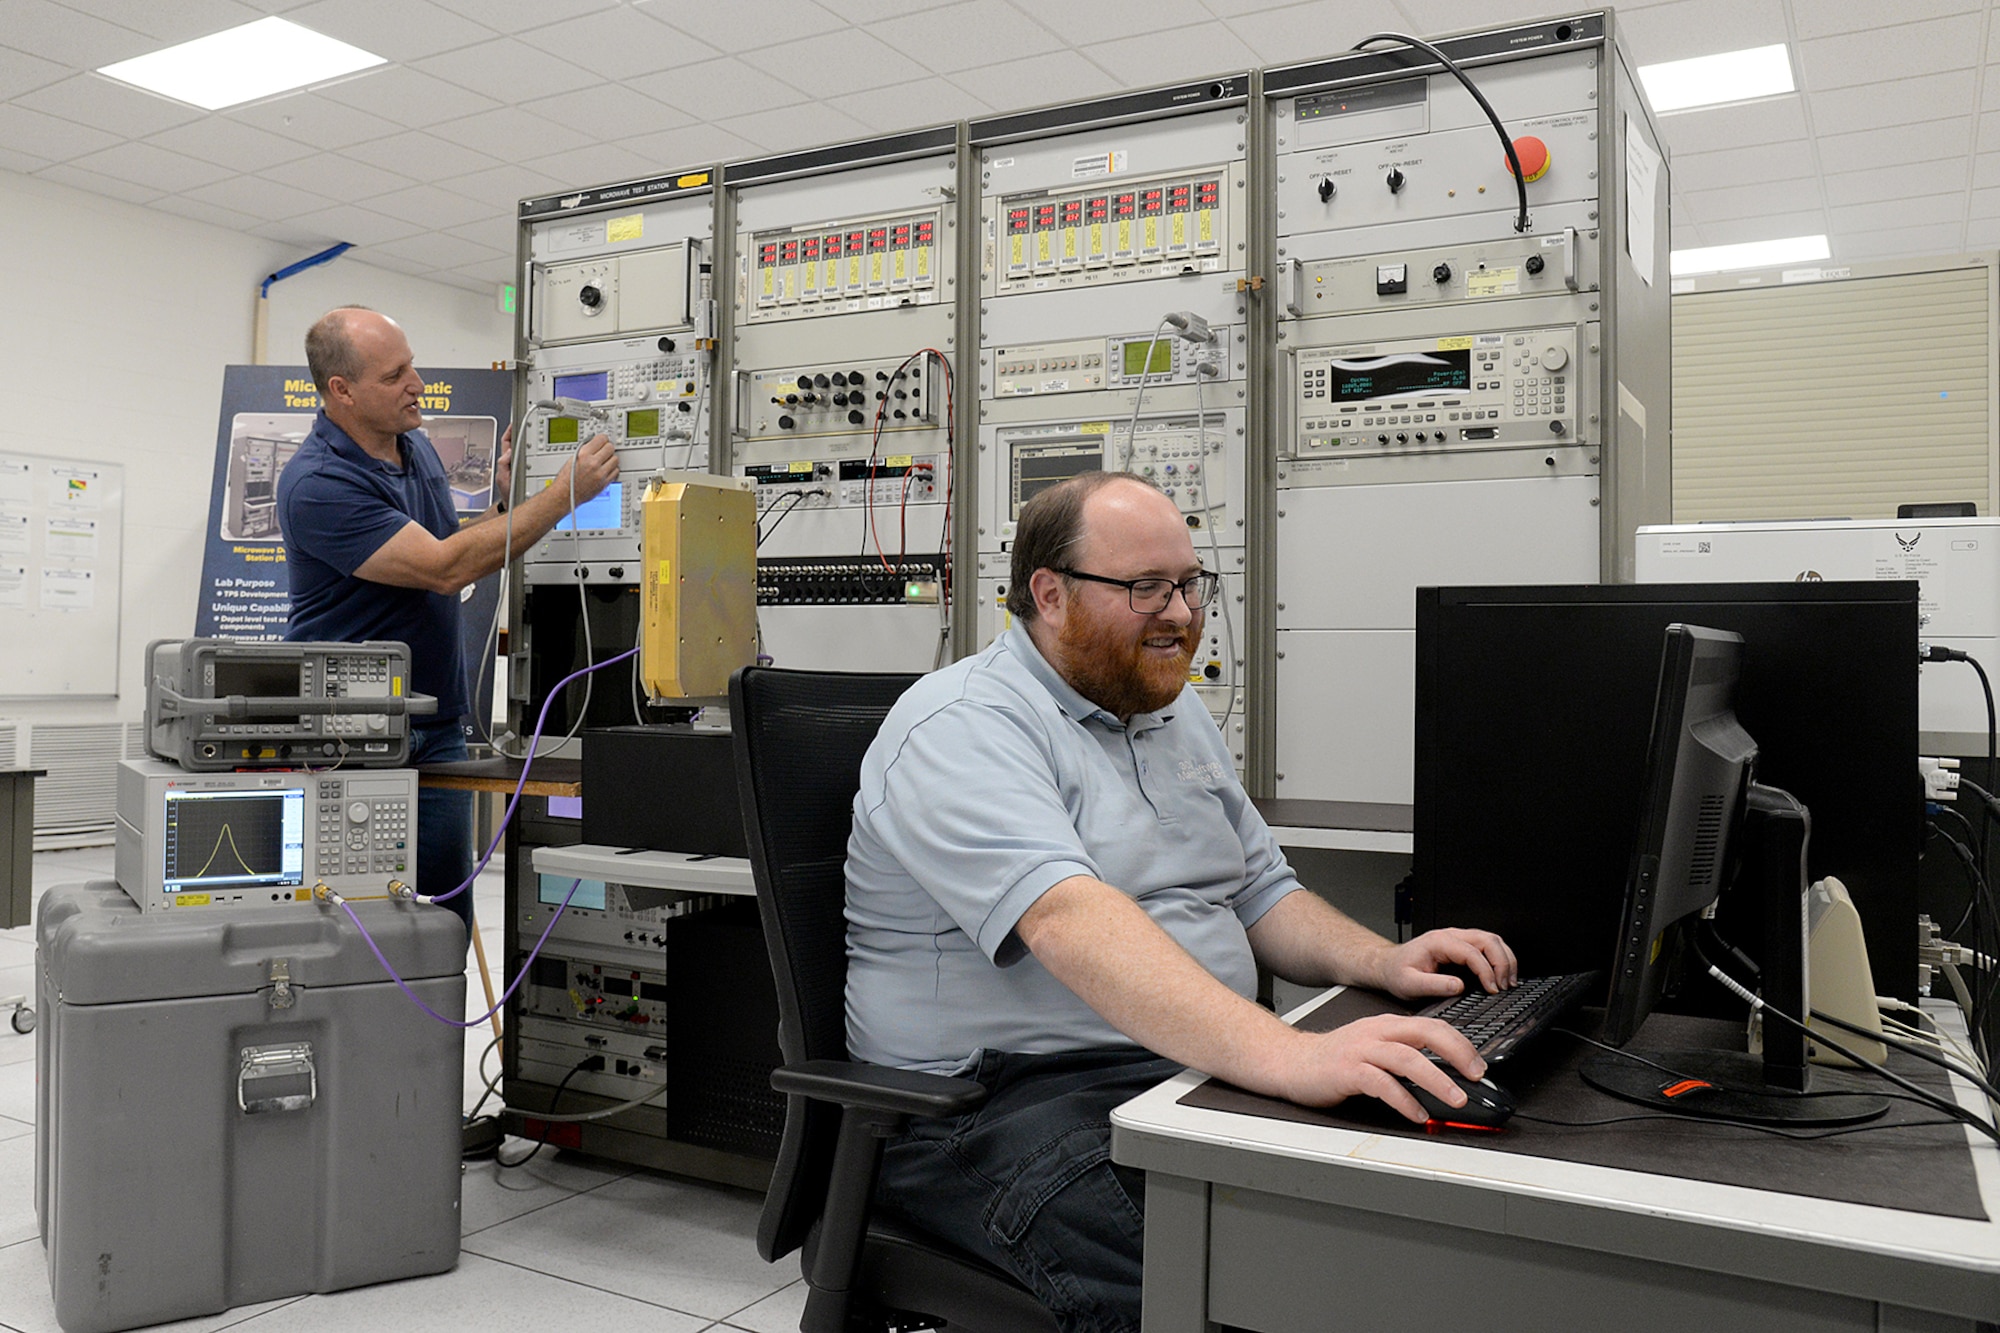 Bobby McNeal (front) and David James work together to organically develop automatic test equipment systems to support the F-16 Nov. 5, 2020, at Hill Air Force Base, Utah. The 309th Software Engineering Group has a positive and direct impact across multiple essential platforms such as the A-10, F-16, F-22, F-35, Ground Based Strategic Deterrent, Space Systems, and Command and Control.  (U.S. Air Force photo by Alex R. Lloyd)